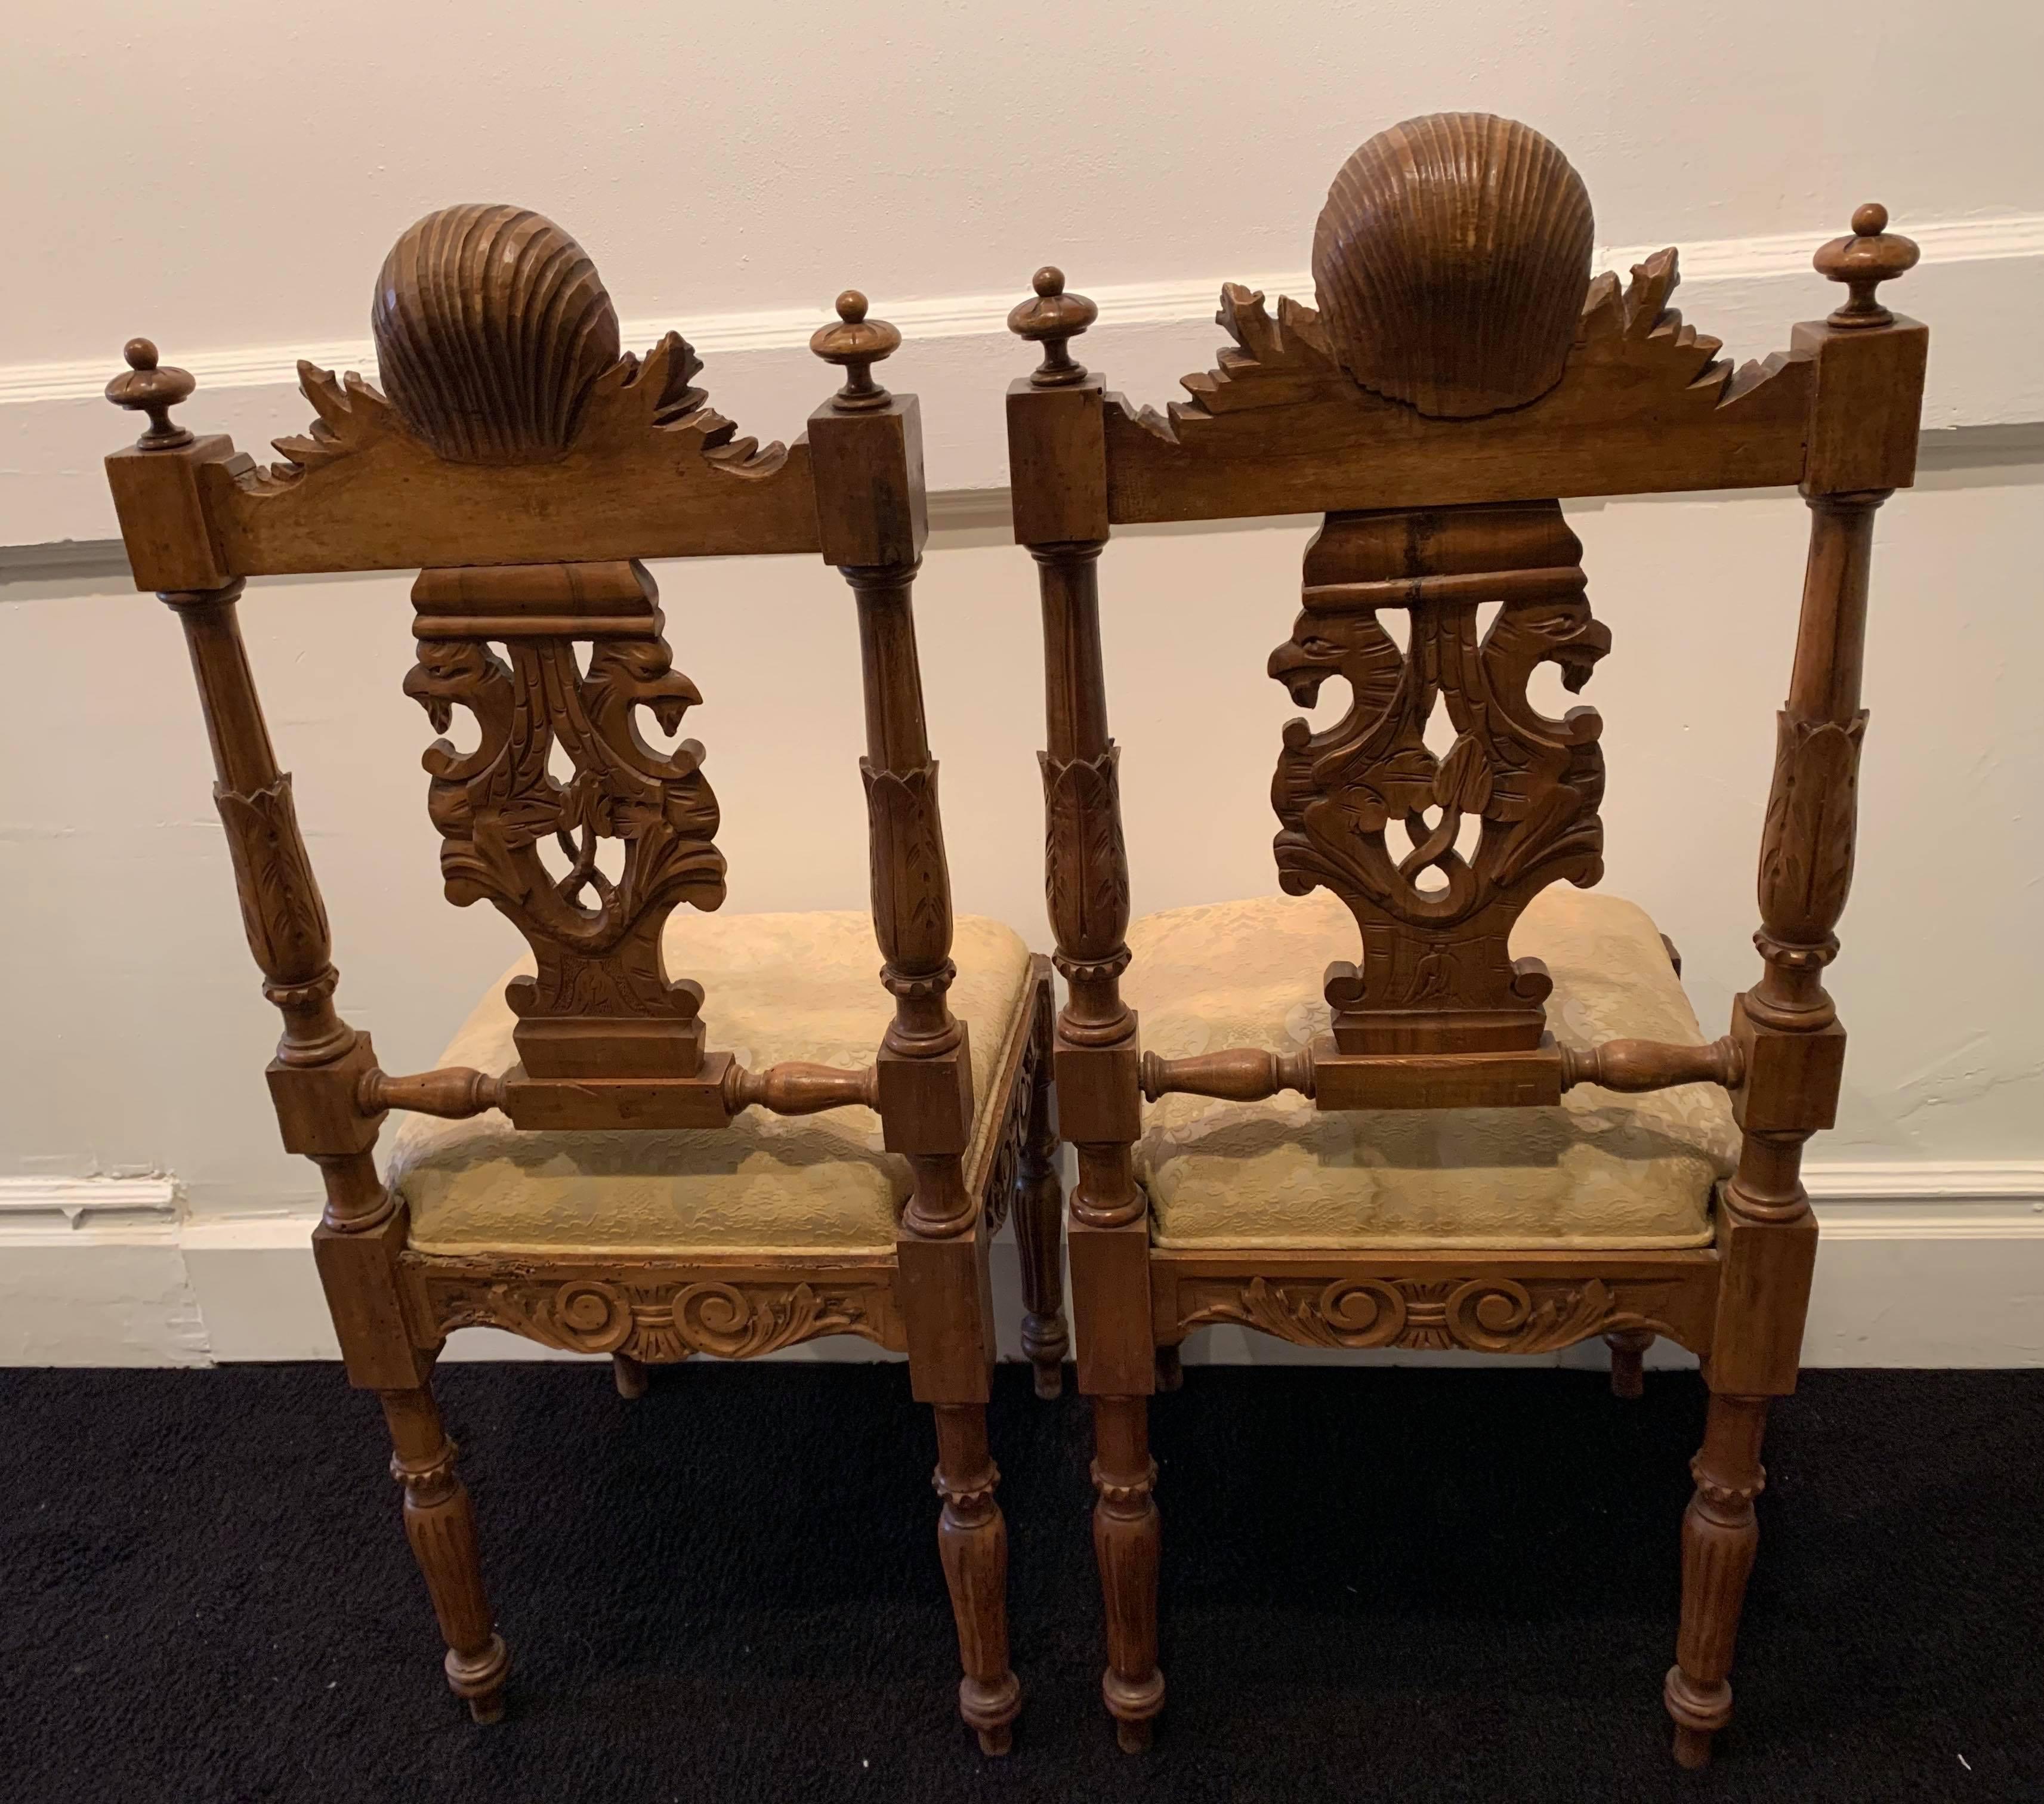 19th Century Pair of Hand-Carved Hall Chairs from Mexico For Sale 5